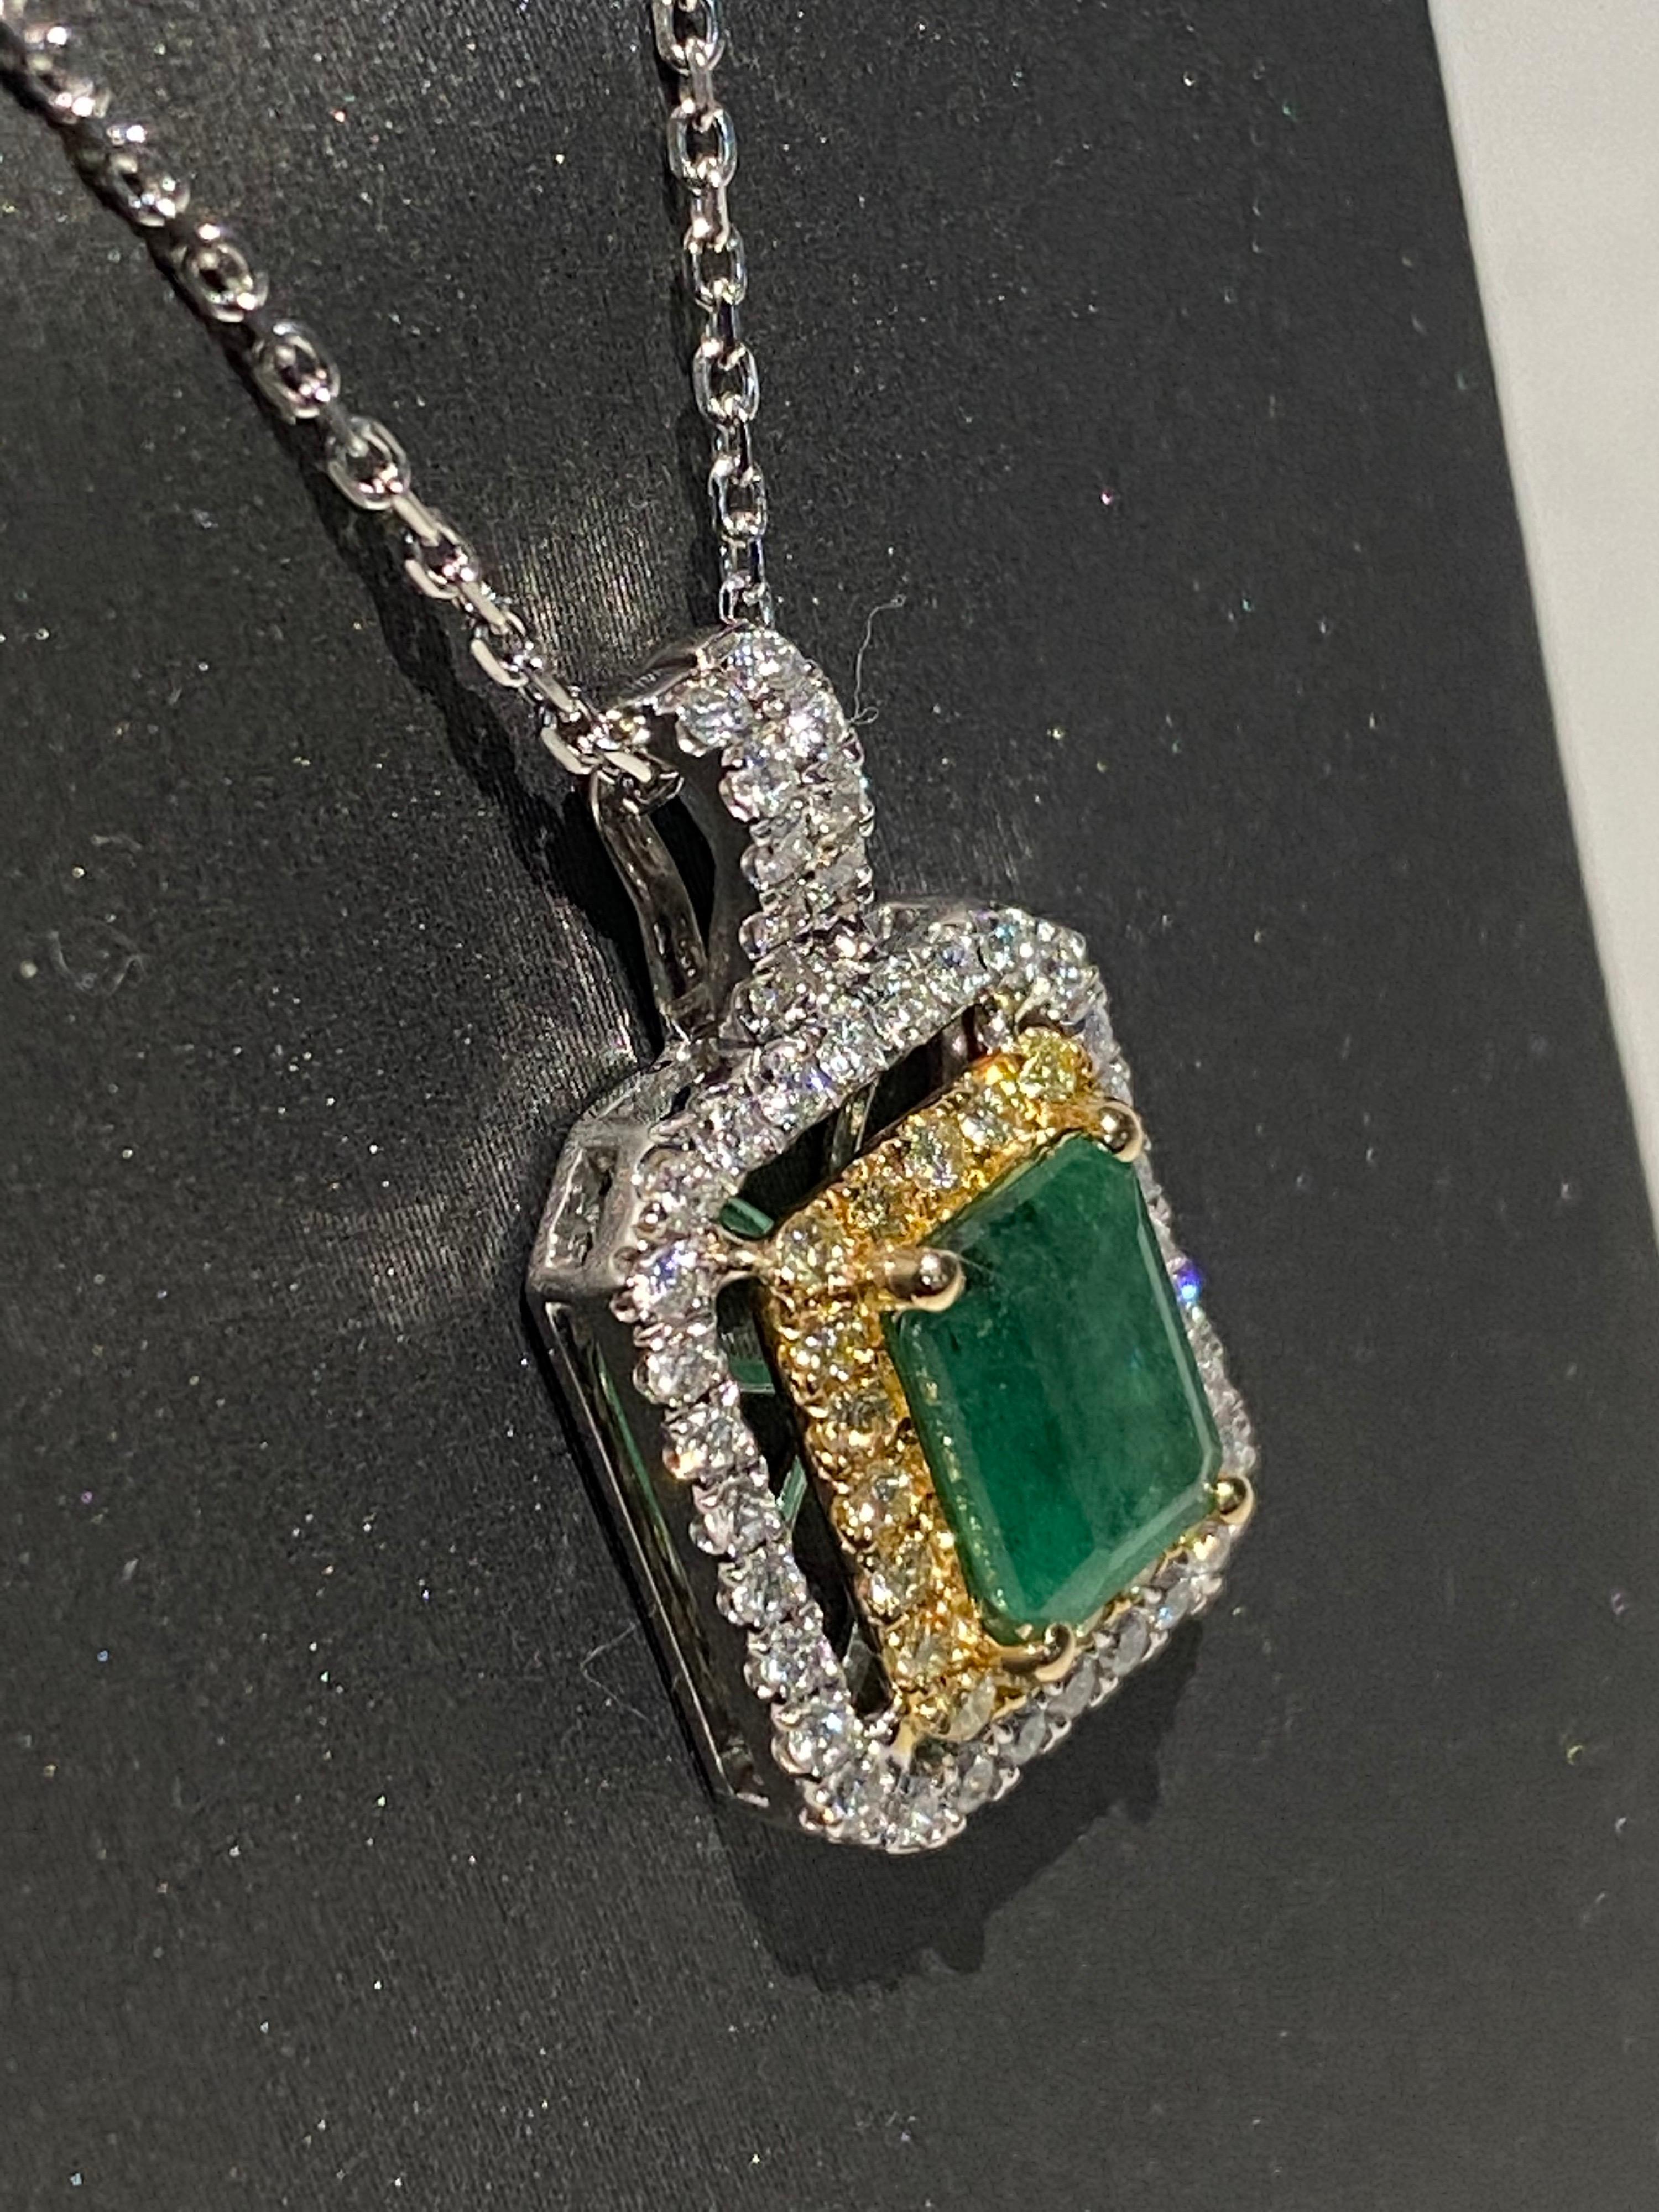 Emerald cut emerald has double halo of yellow and white diamonds. Double halo makes the center stone stand out and look bigger. Set in two tone gold, a white gold chain is included. 
Emerald: 1.45ct
White Diamond: 0.40ct
Yellow Diamond: 0.22ct
Two